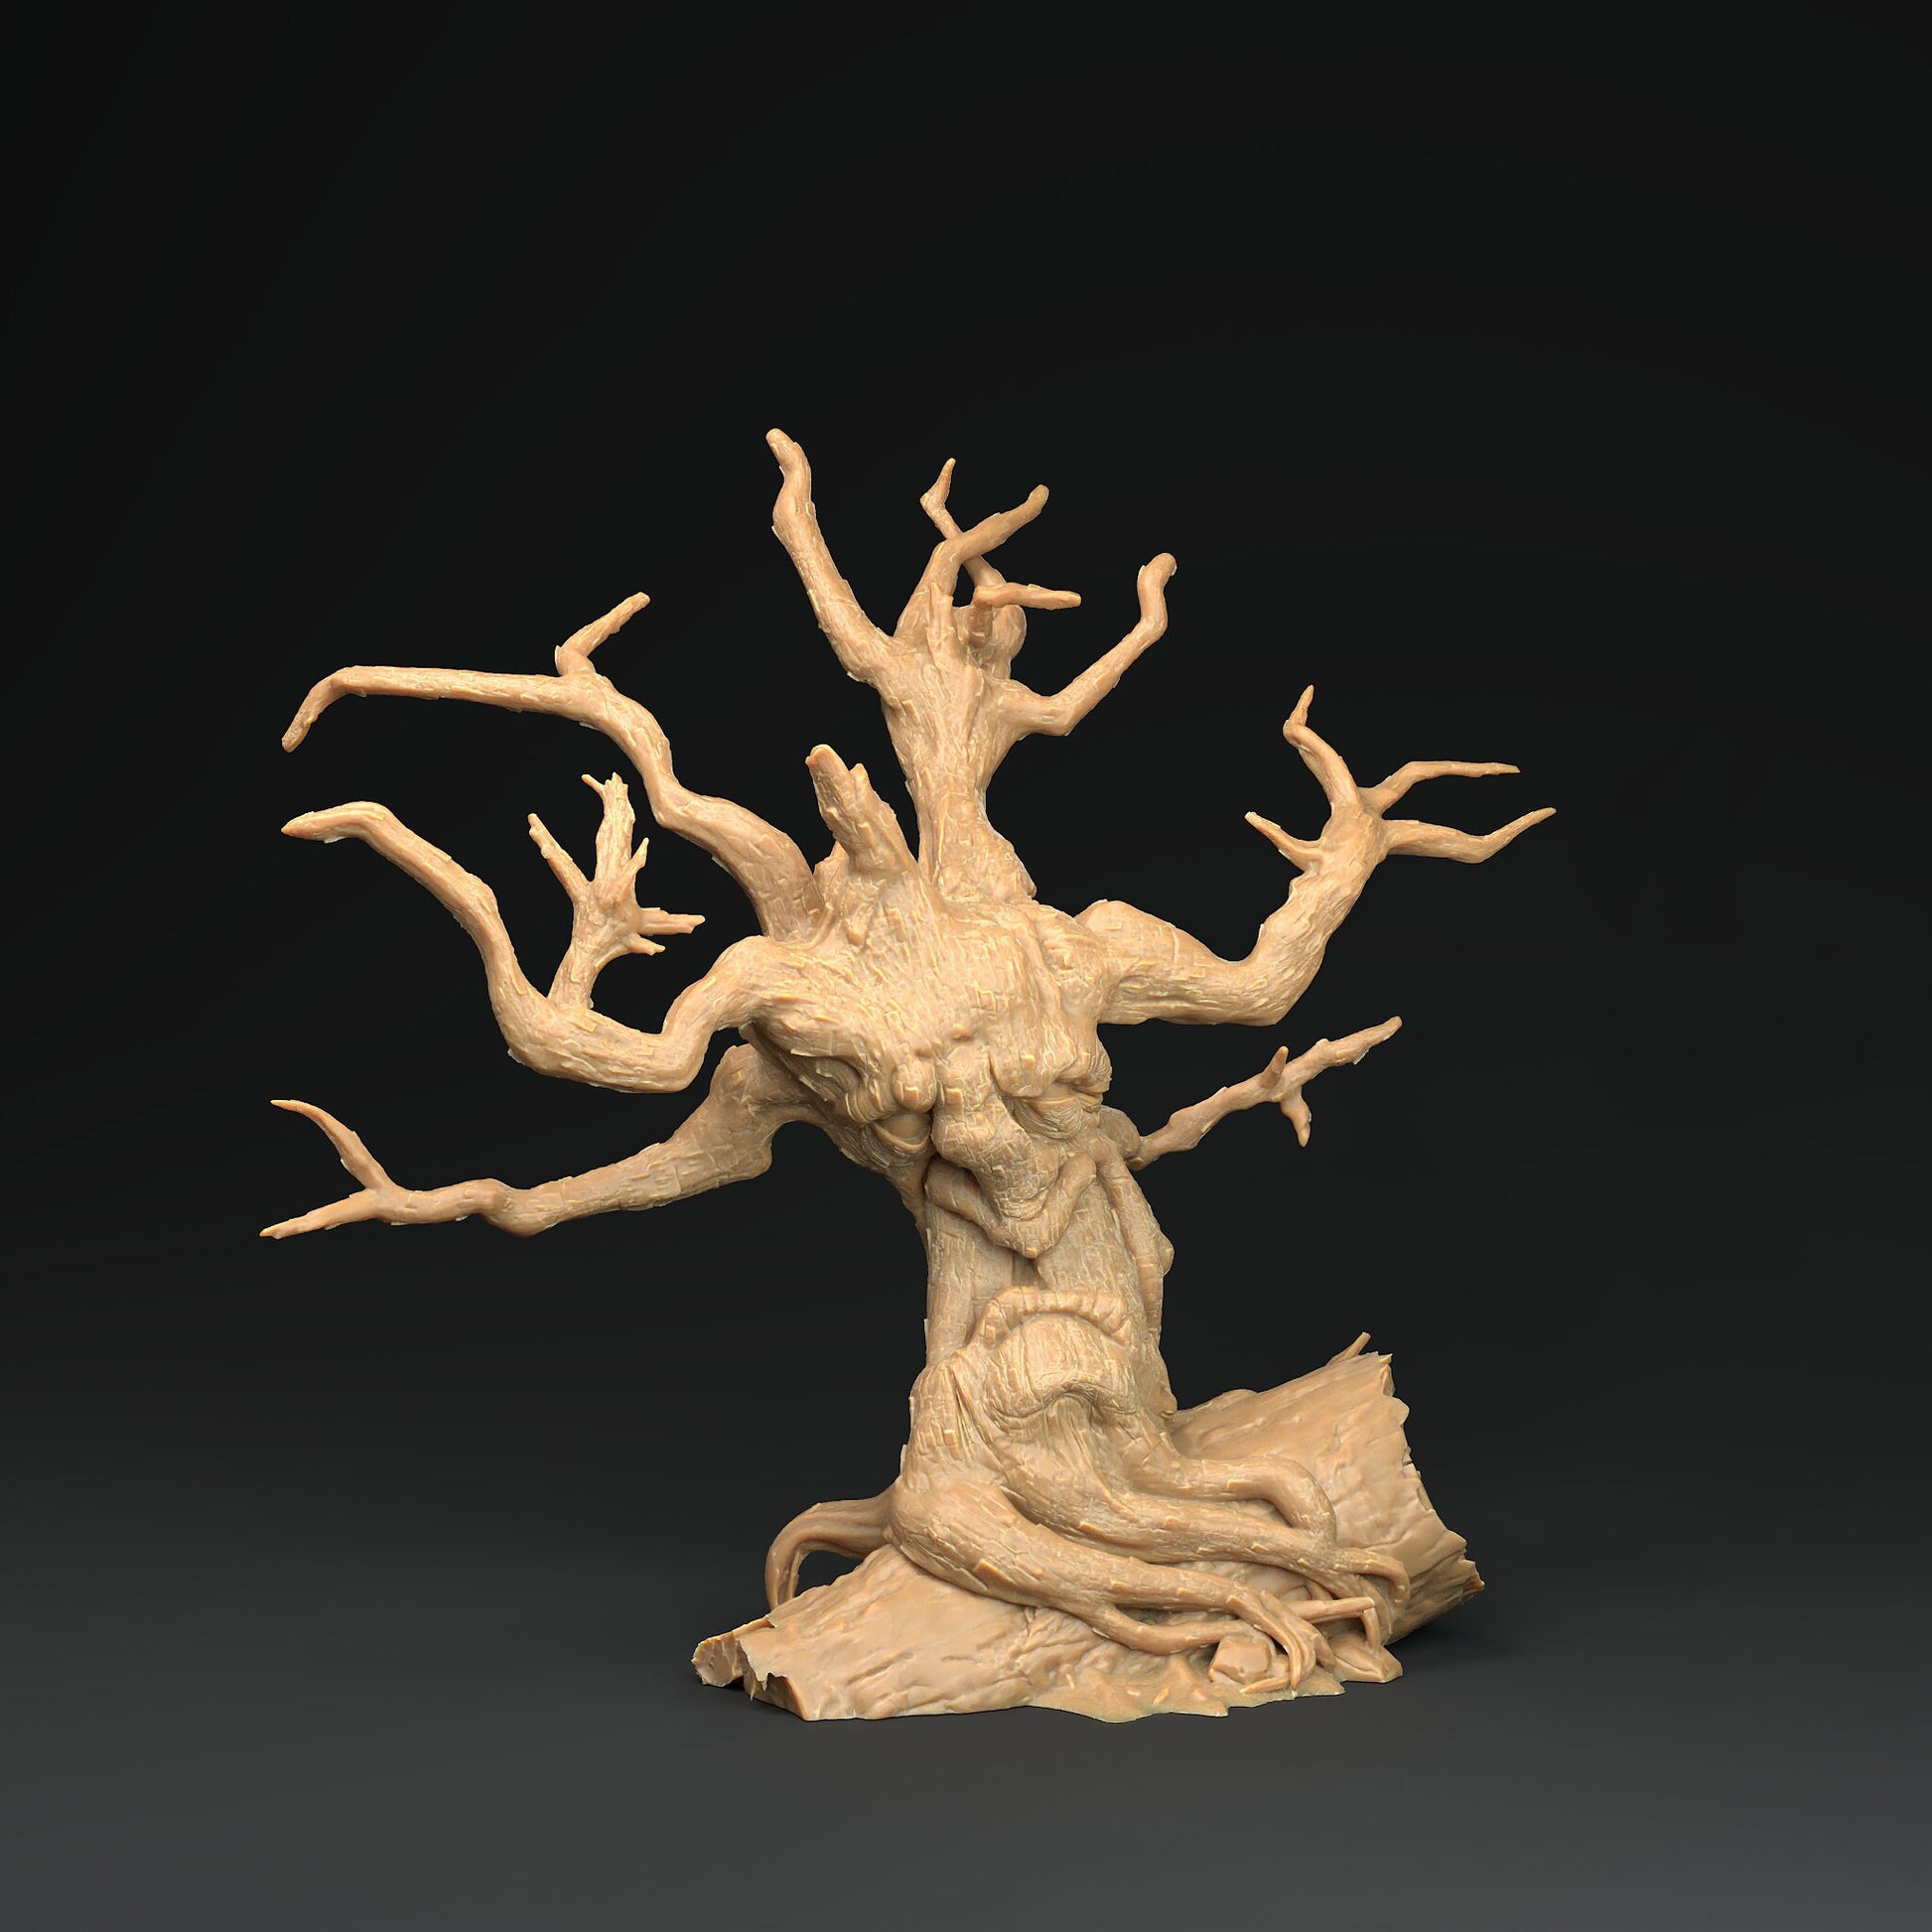 Awakened Trees | RPG Miniature for Dungeons and Dragons|Pathfinder|Tabletop Wargaming | Fey Miniature | Dragon Trappers Lodge